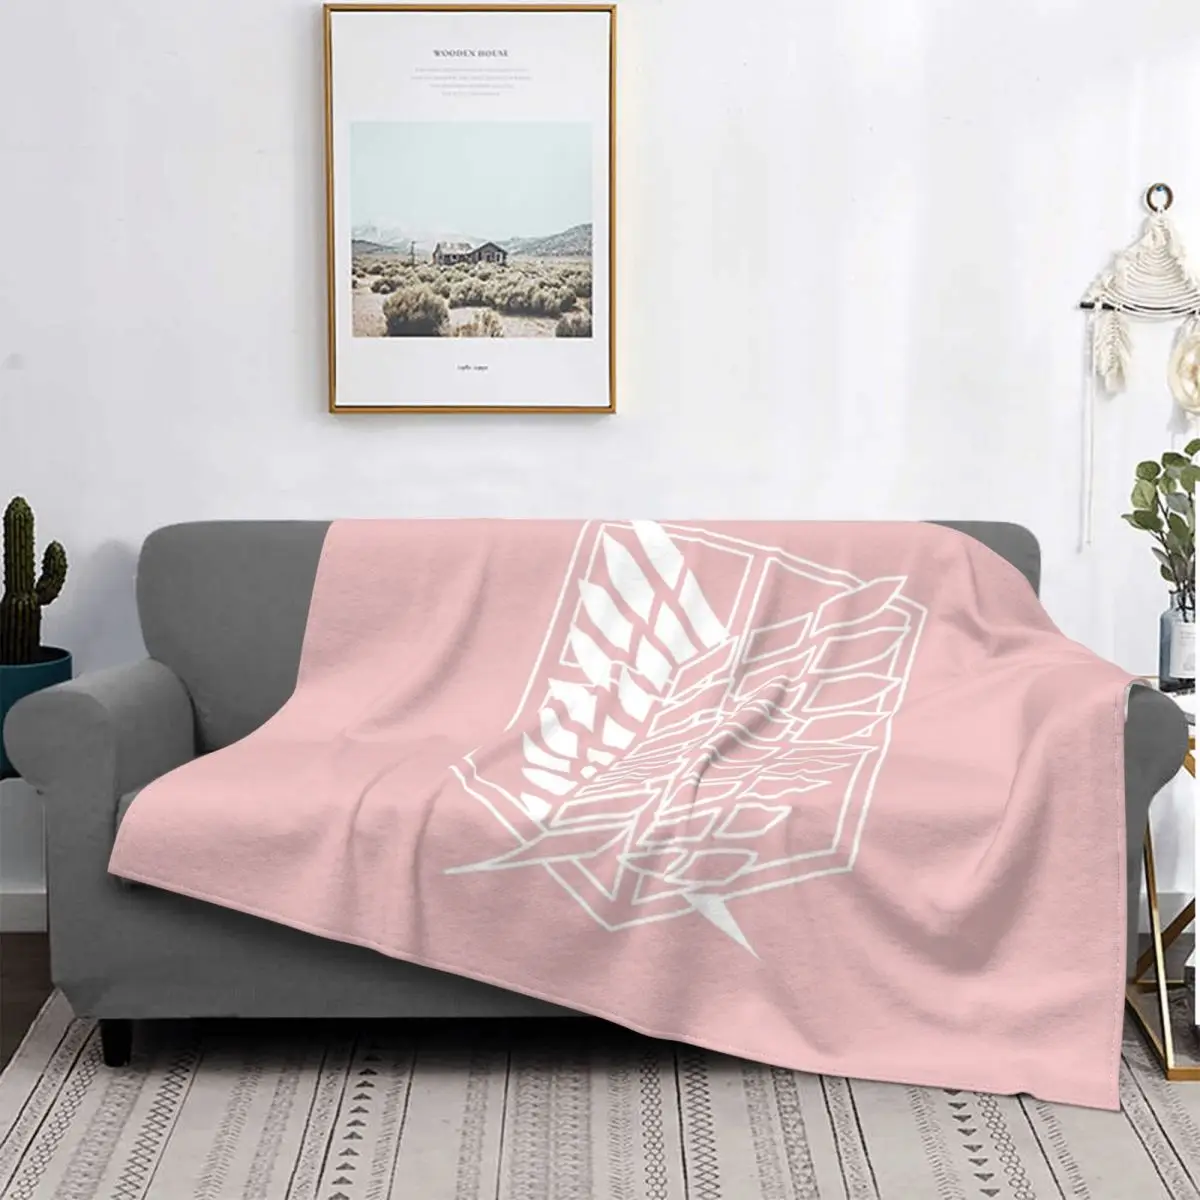 

Pink Blush Wings Of Freedom Blanket Anime Attack On Titan Winter Bedspread Plush Soft Cover Fleece Spread Bedding Sofa Travel